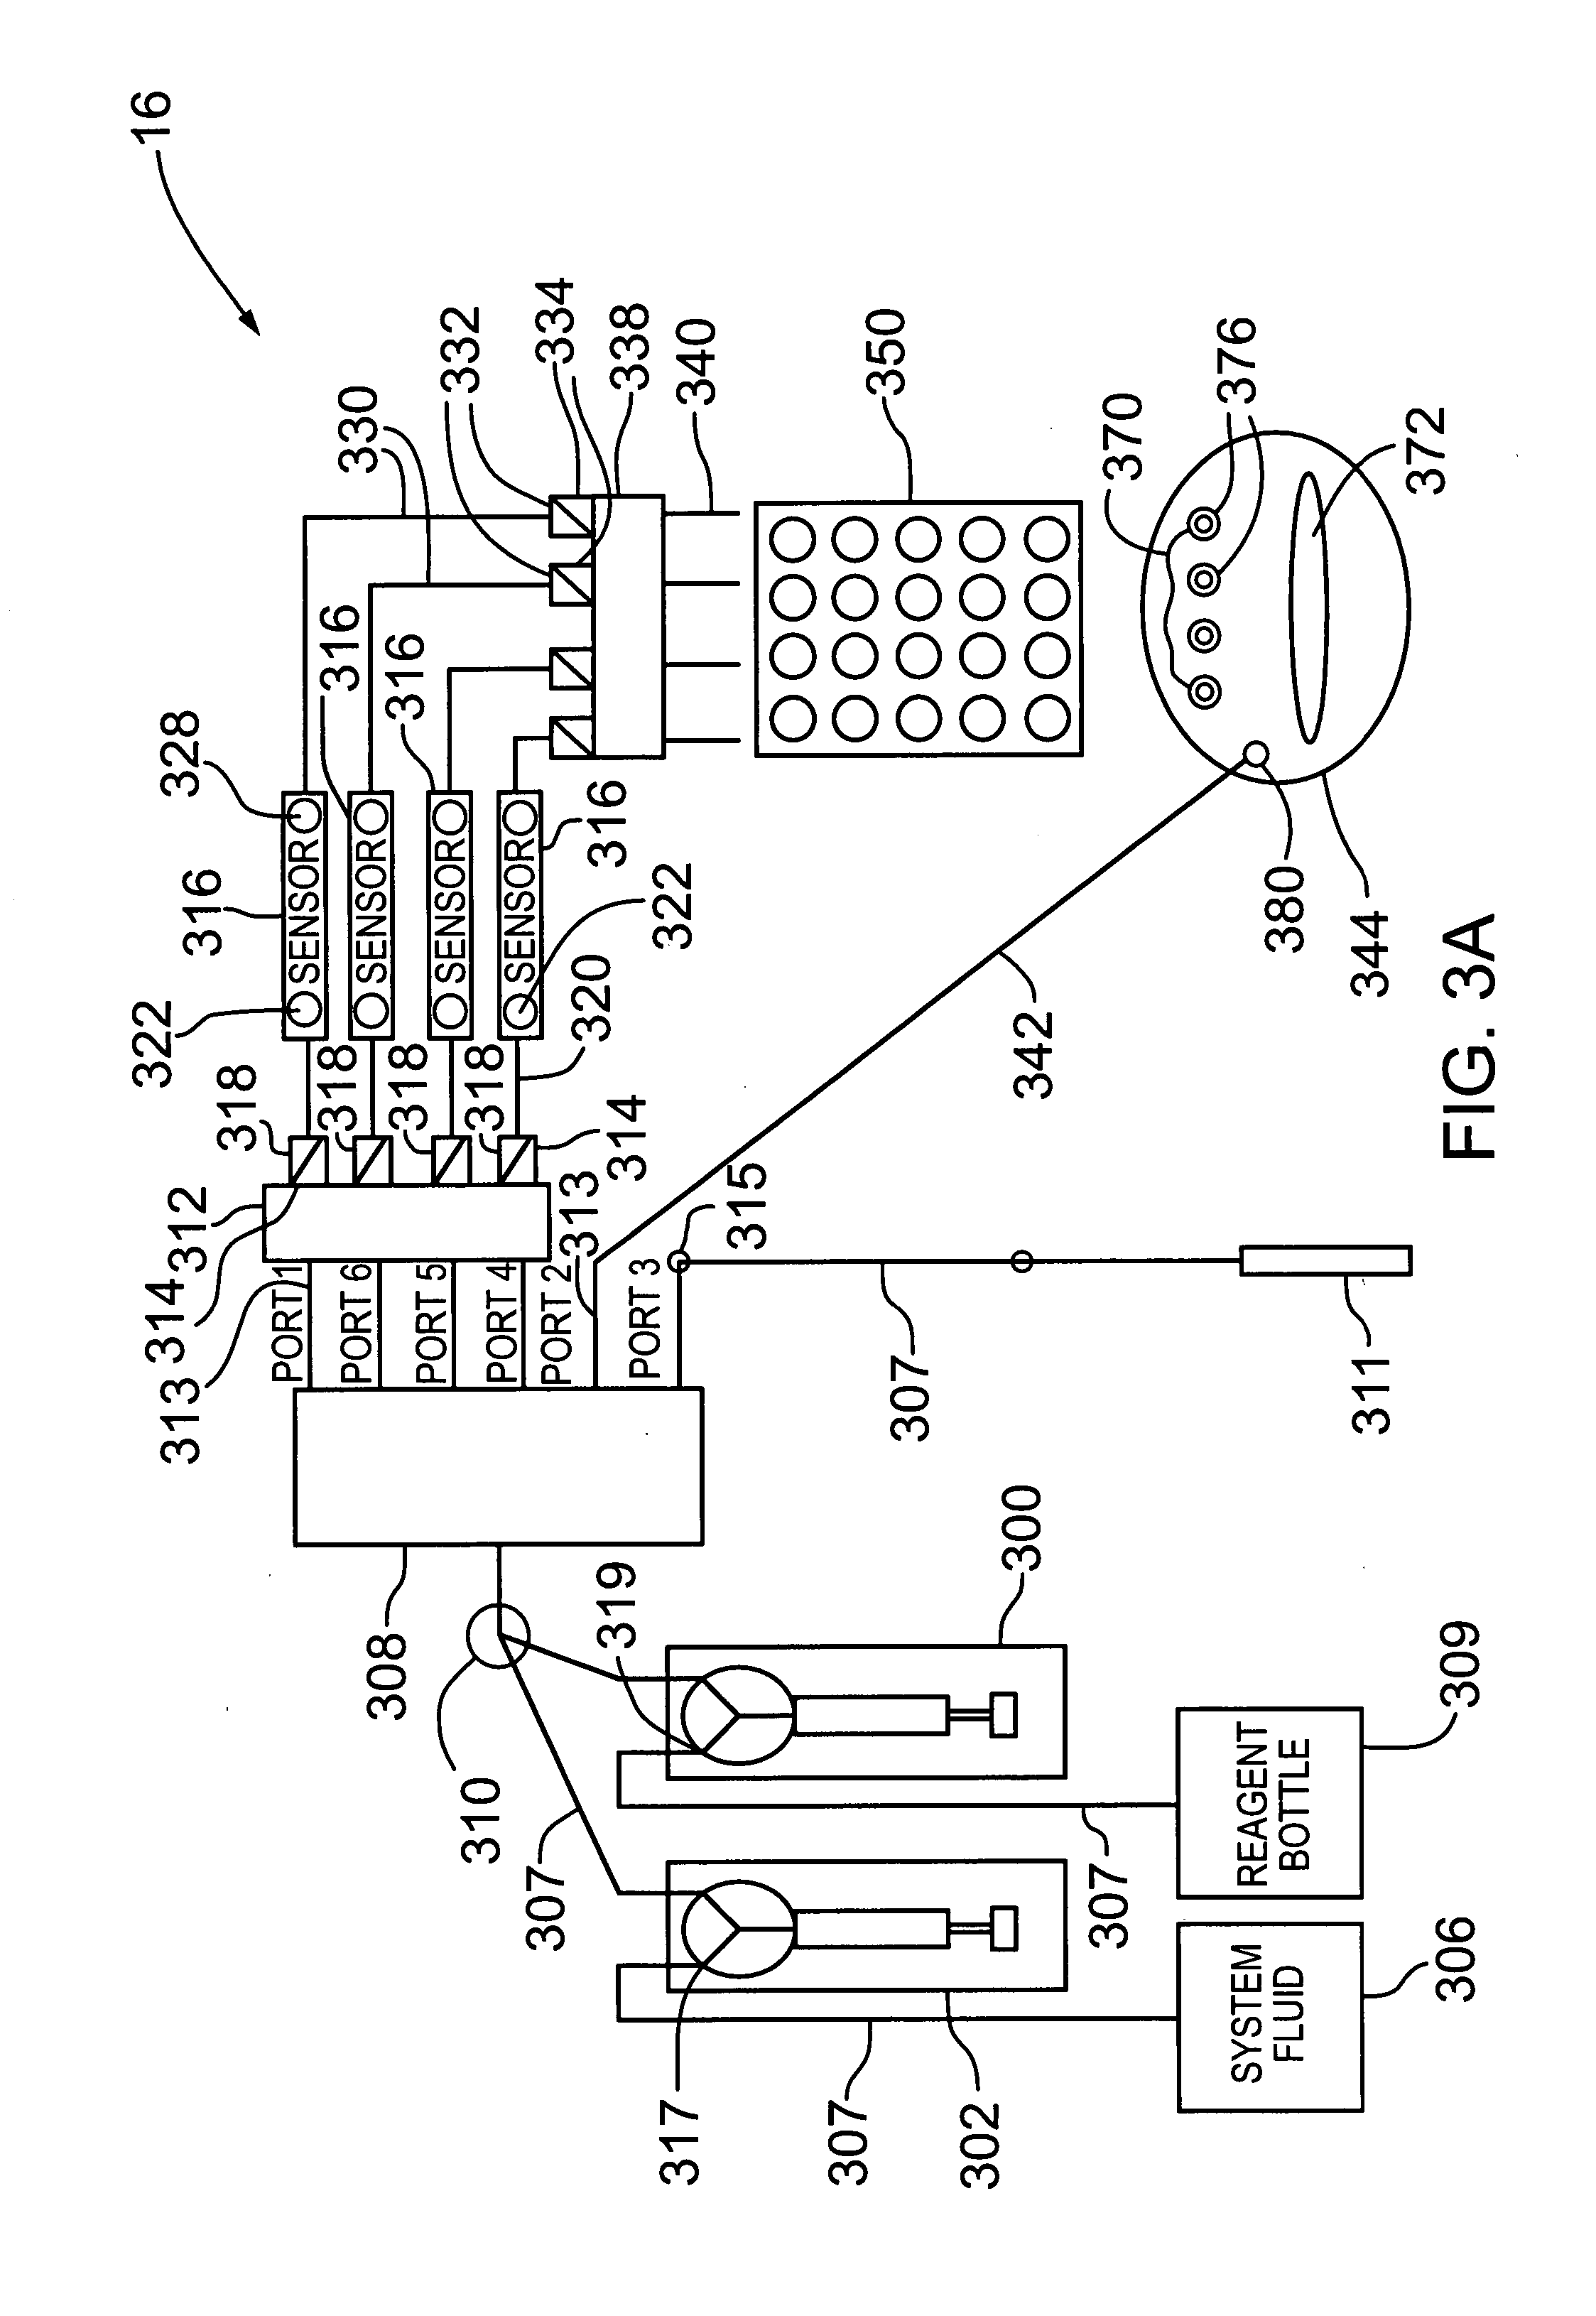 Automated analyzer using light diffraction